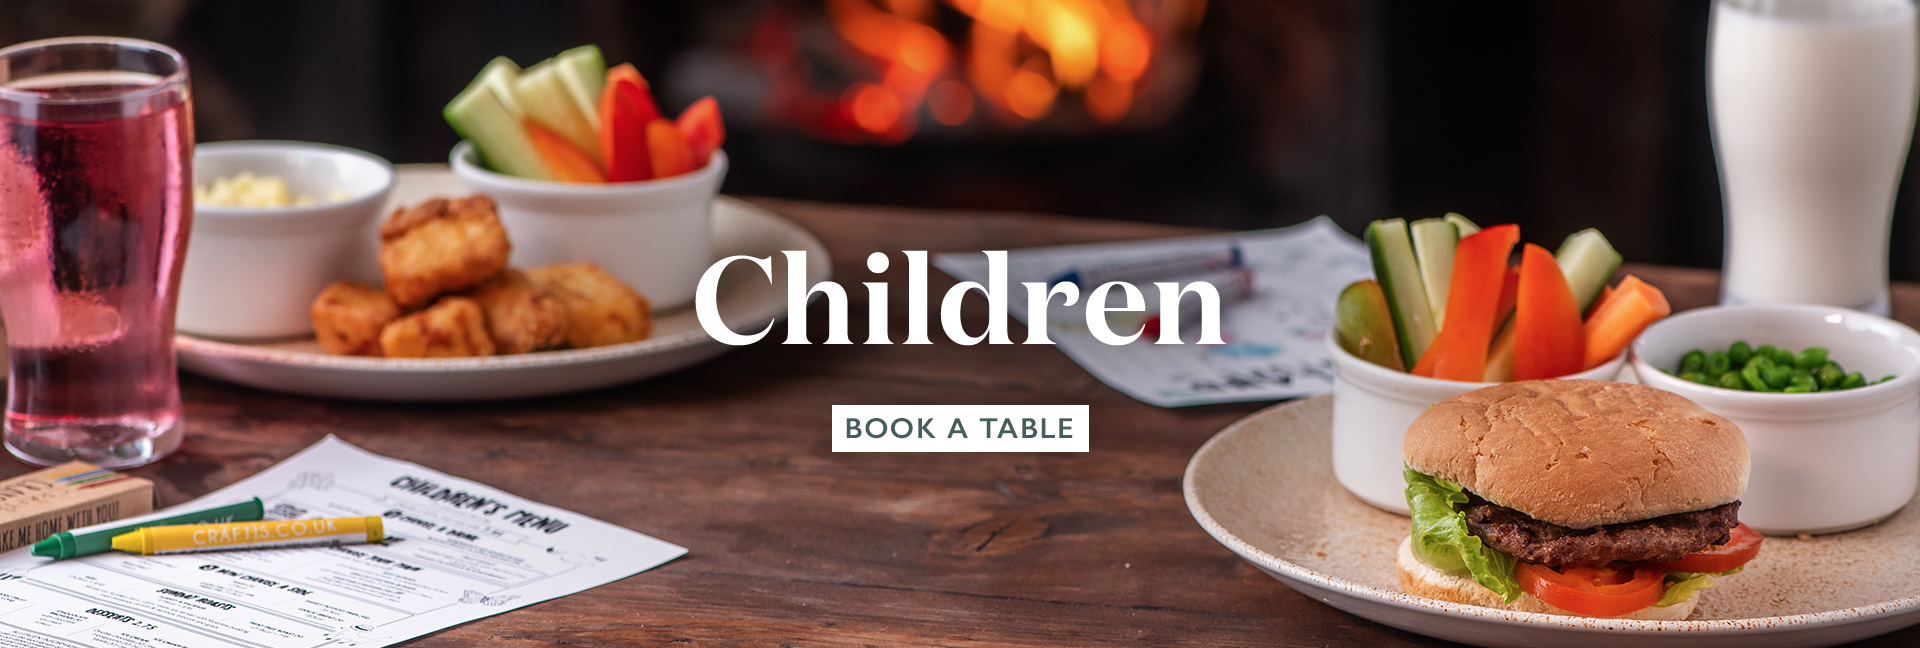 Children's Menu at The Packe Arms